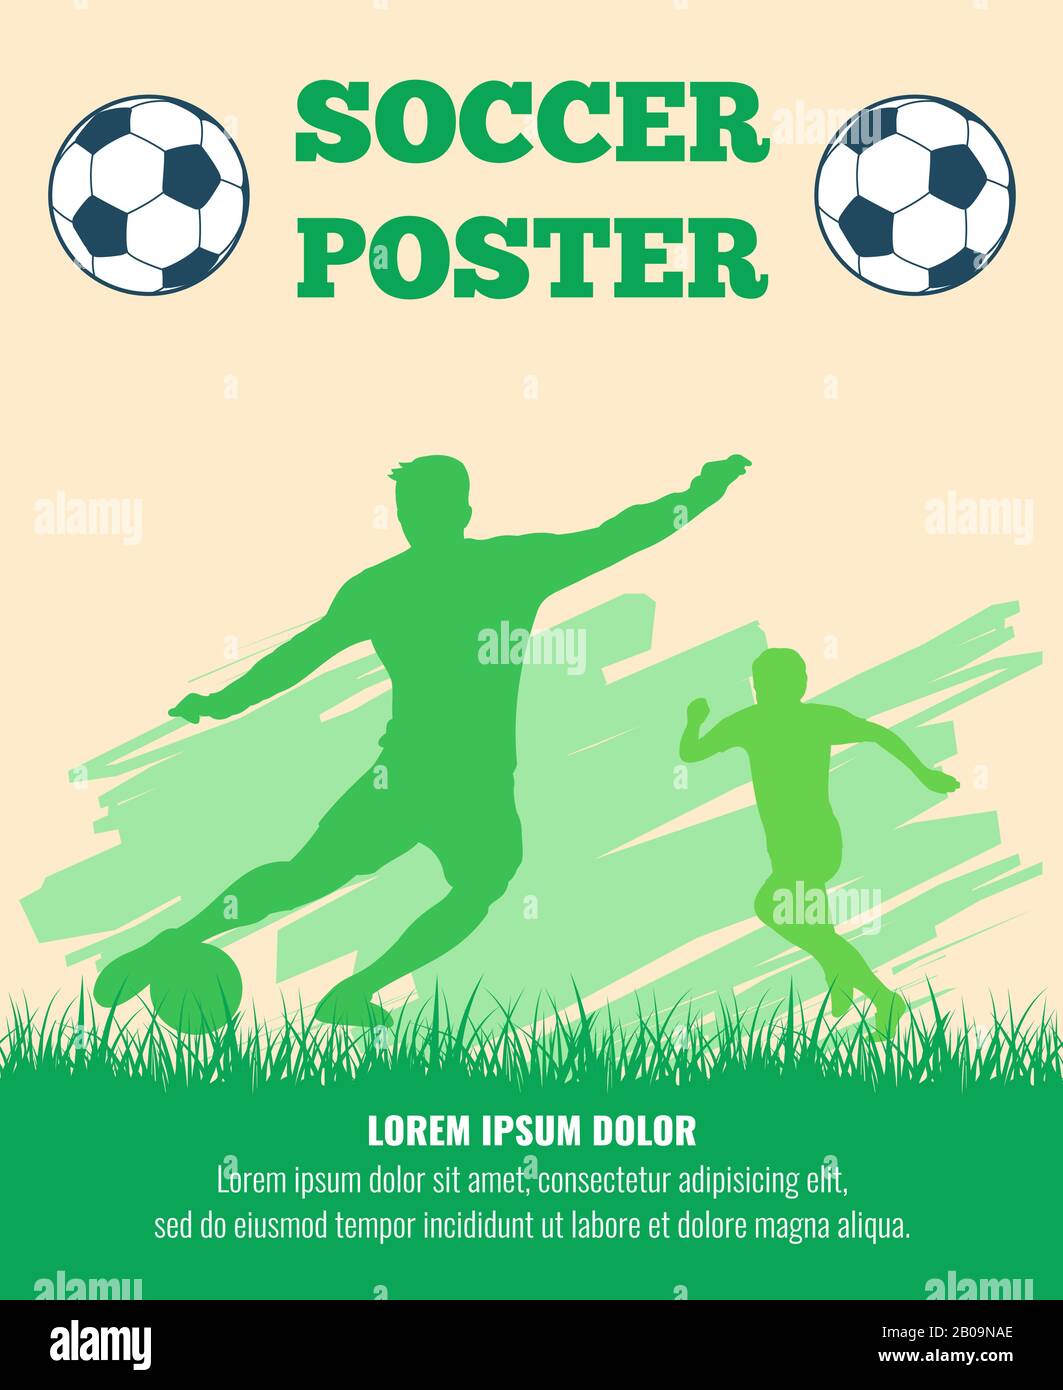 Soccer players vector poster template. Silhouette soccer players with ball illustration Stock Vector